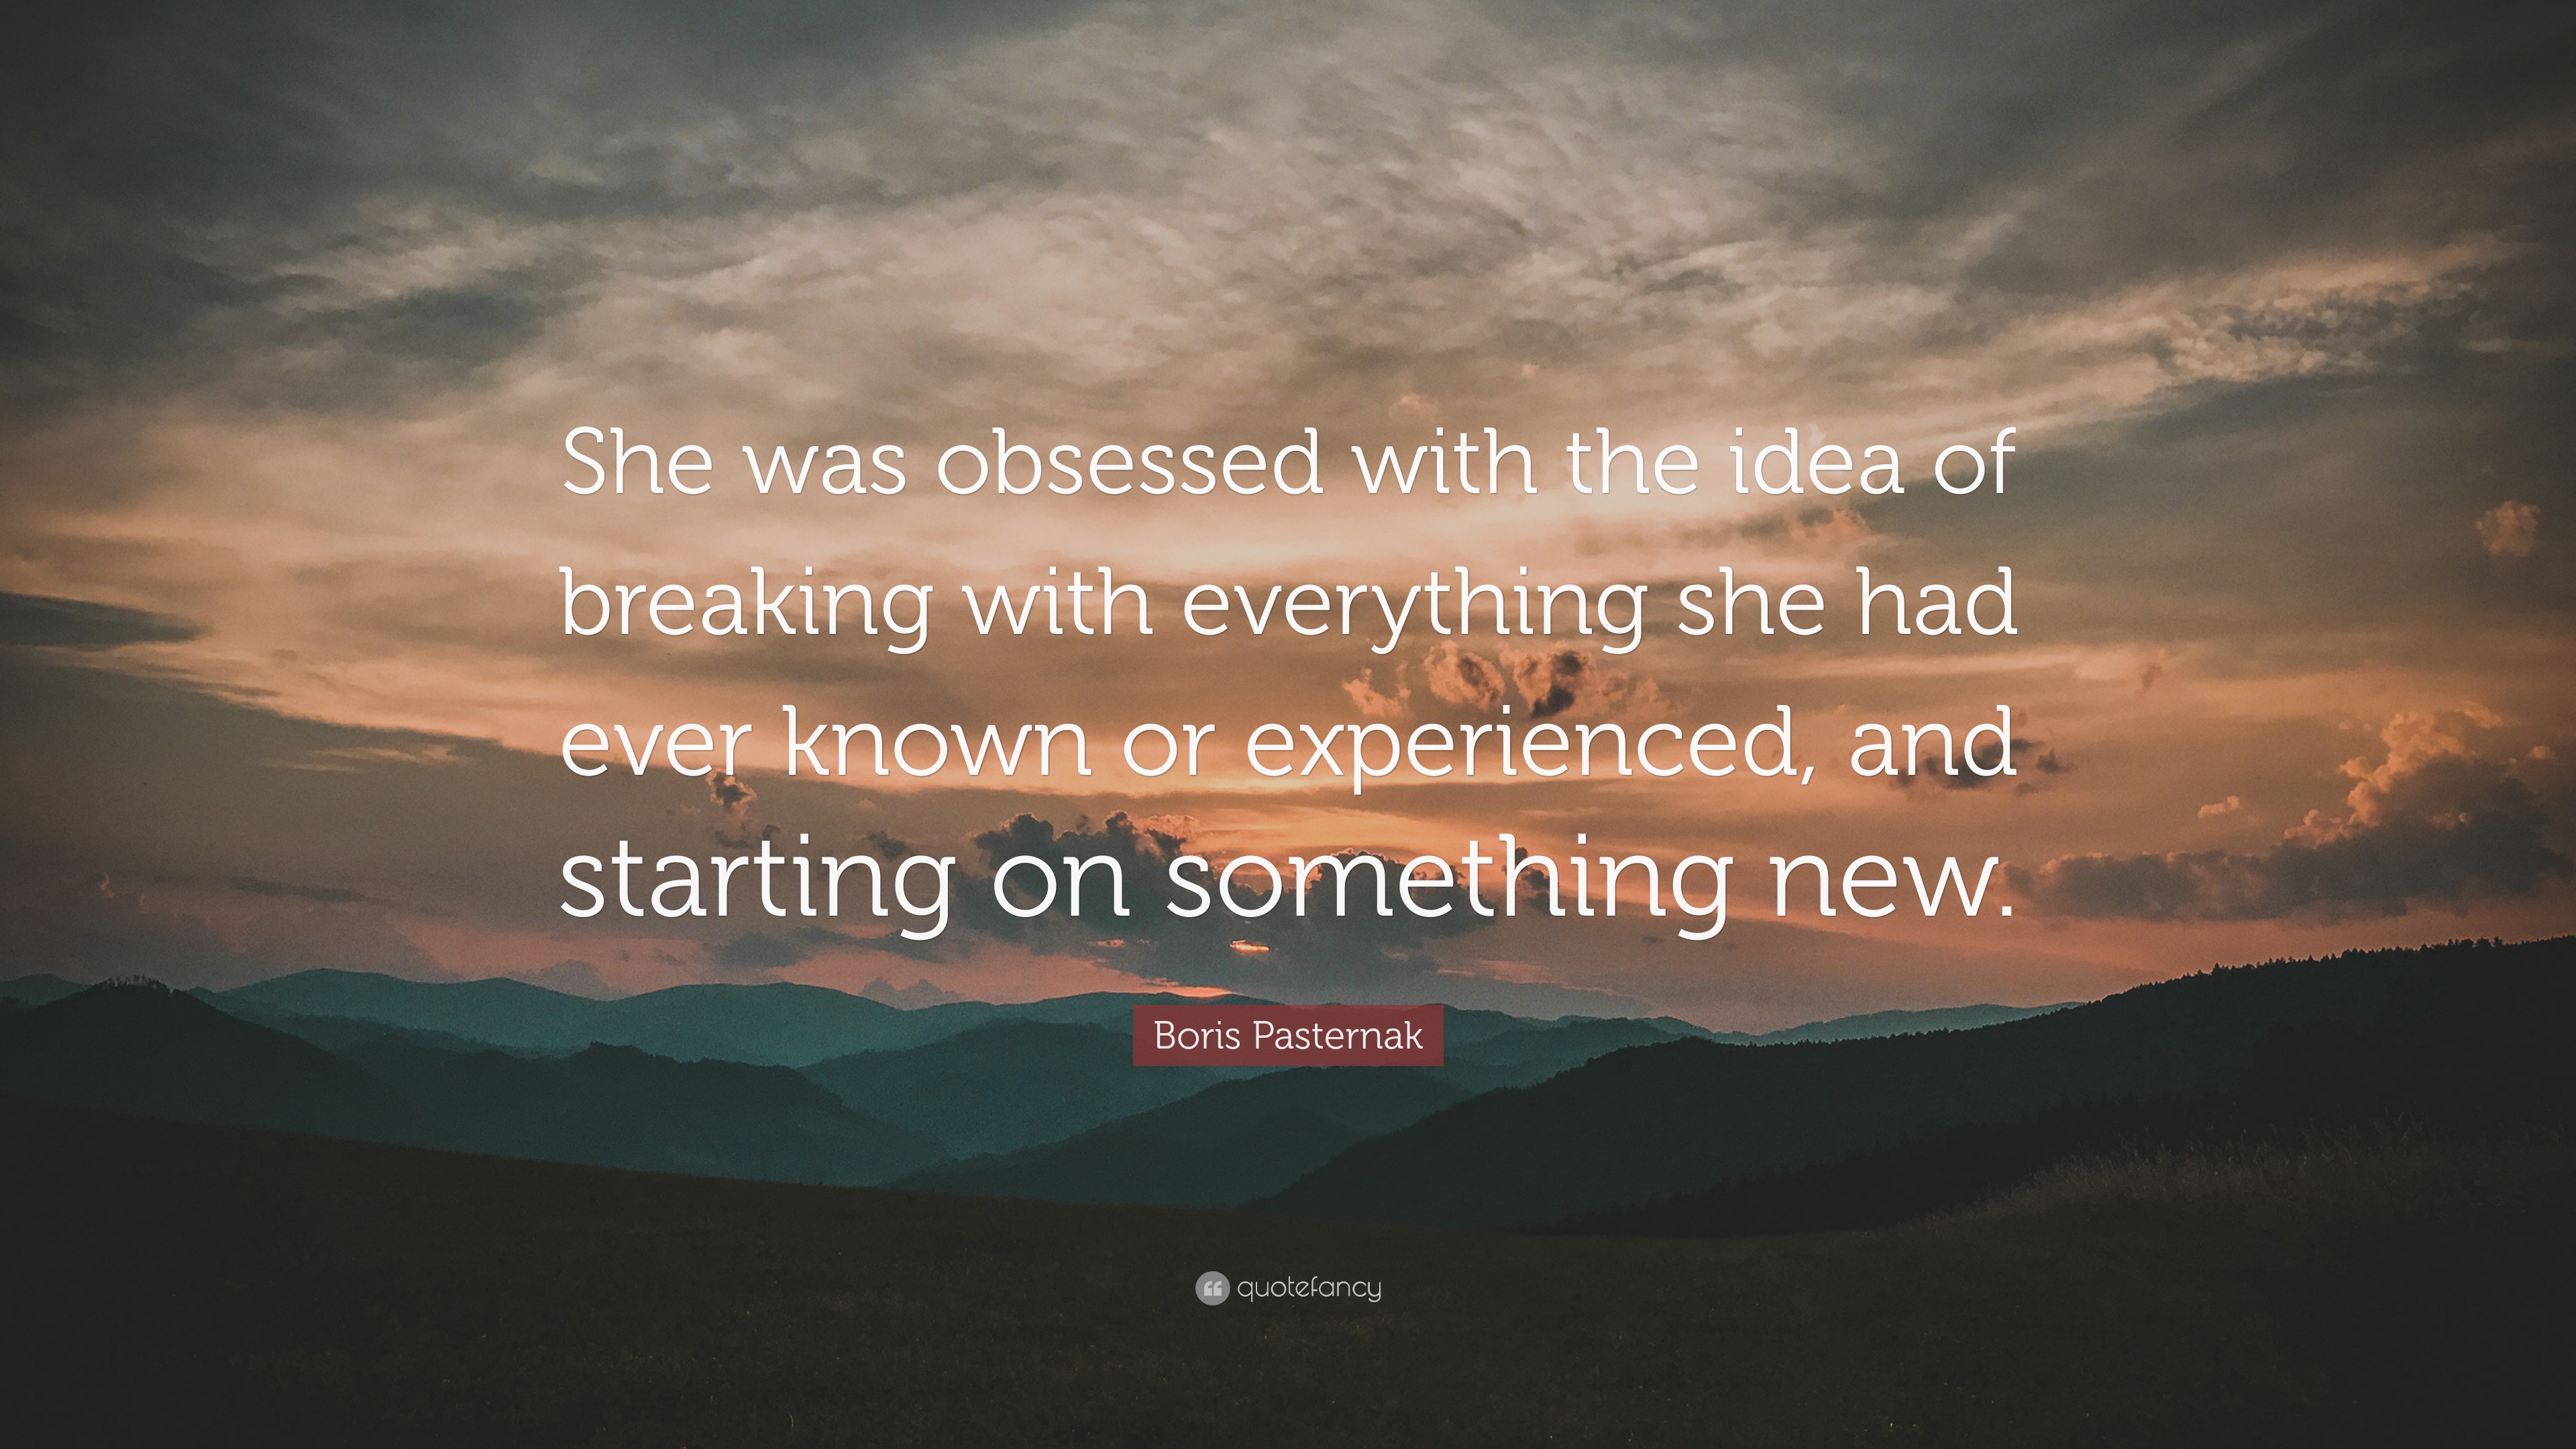 Boris Pasternak Quote: “She was obsessed with the idea of breaking with ...